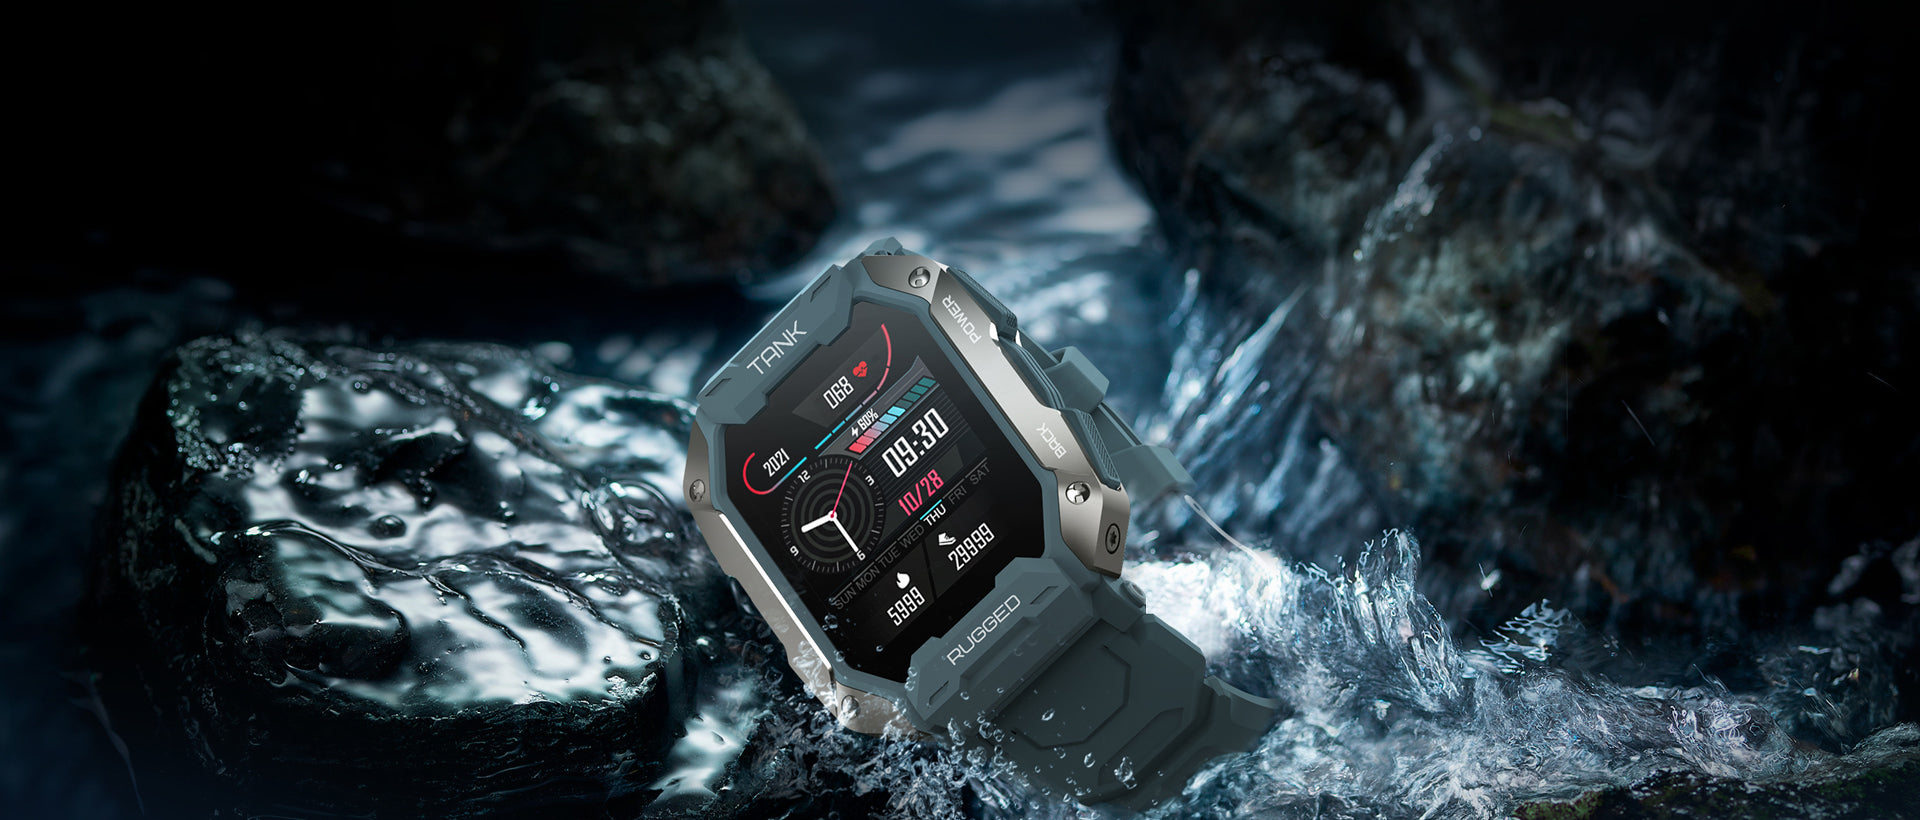 KOSPET TANK M1 PRO Smartwatch is Made For Outdoor Sports